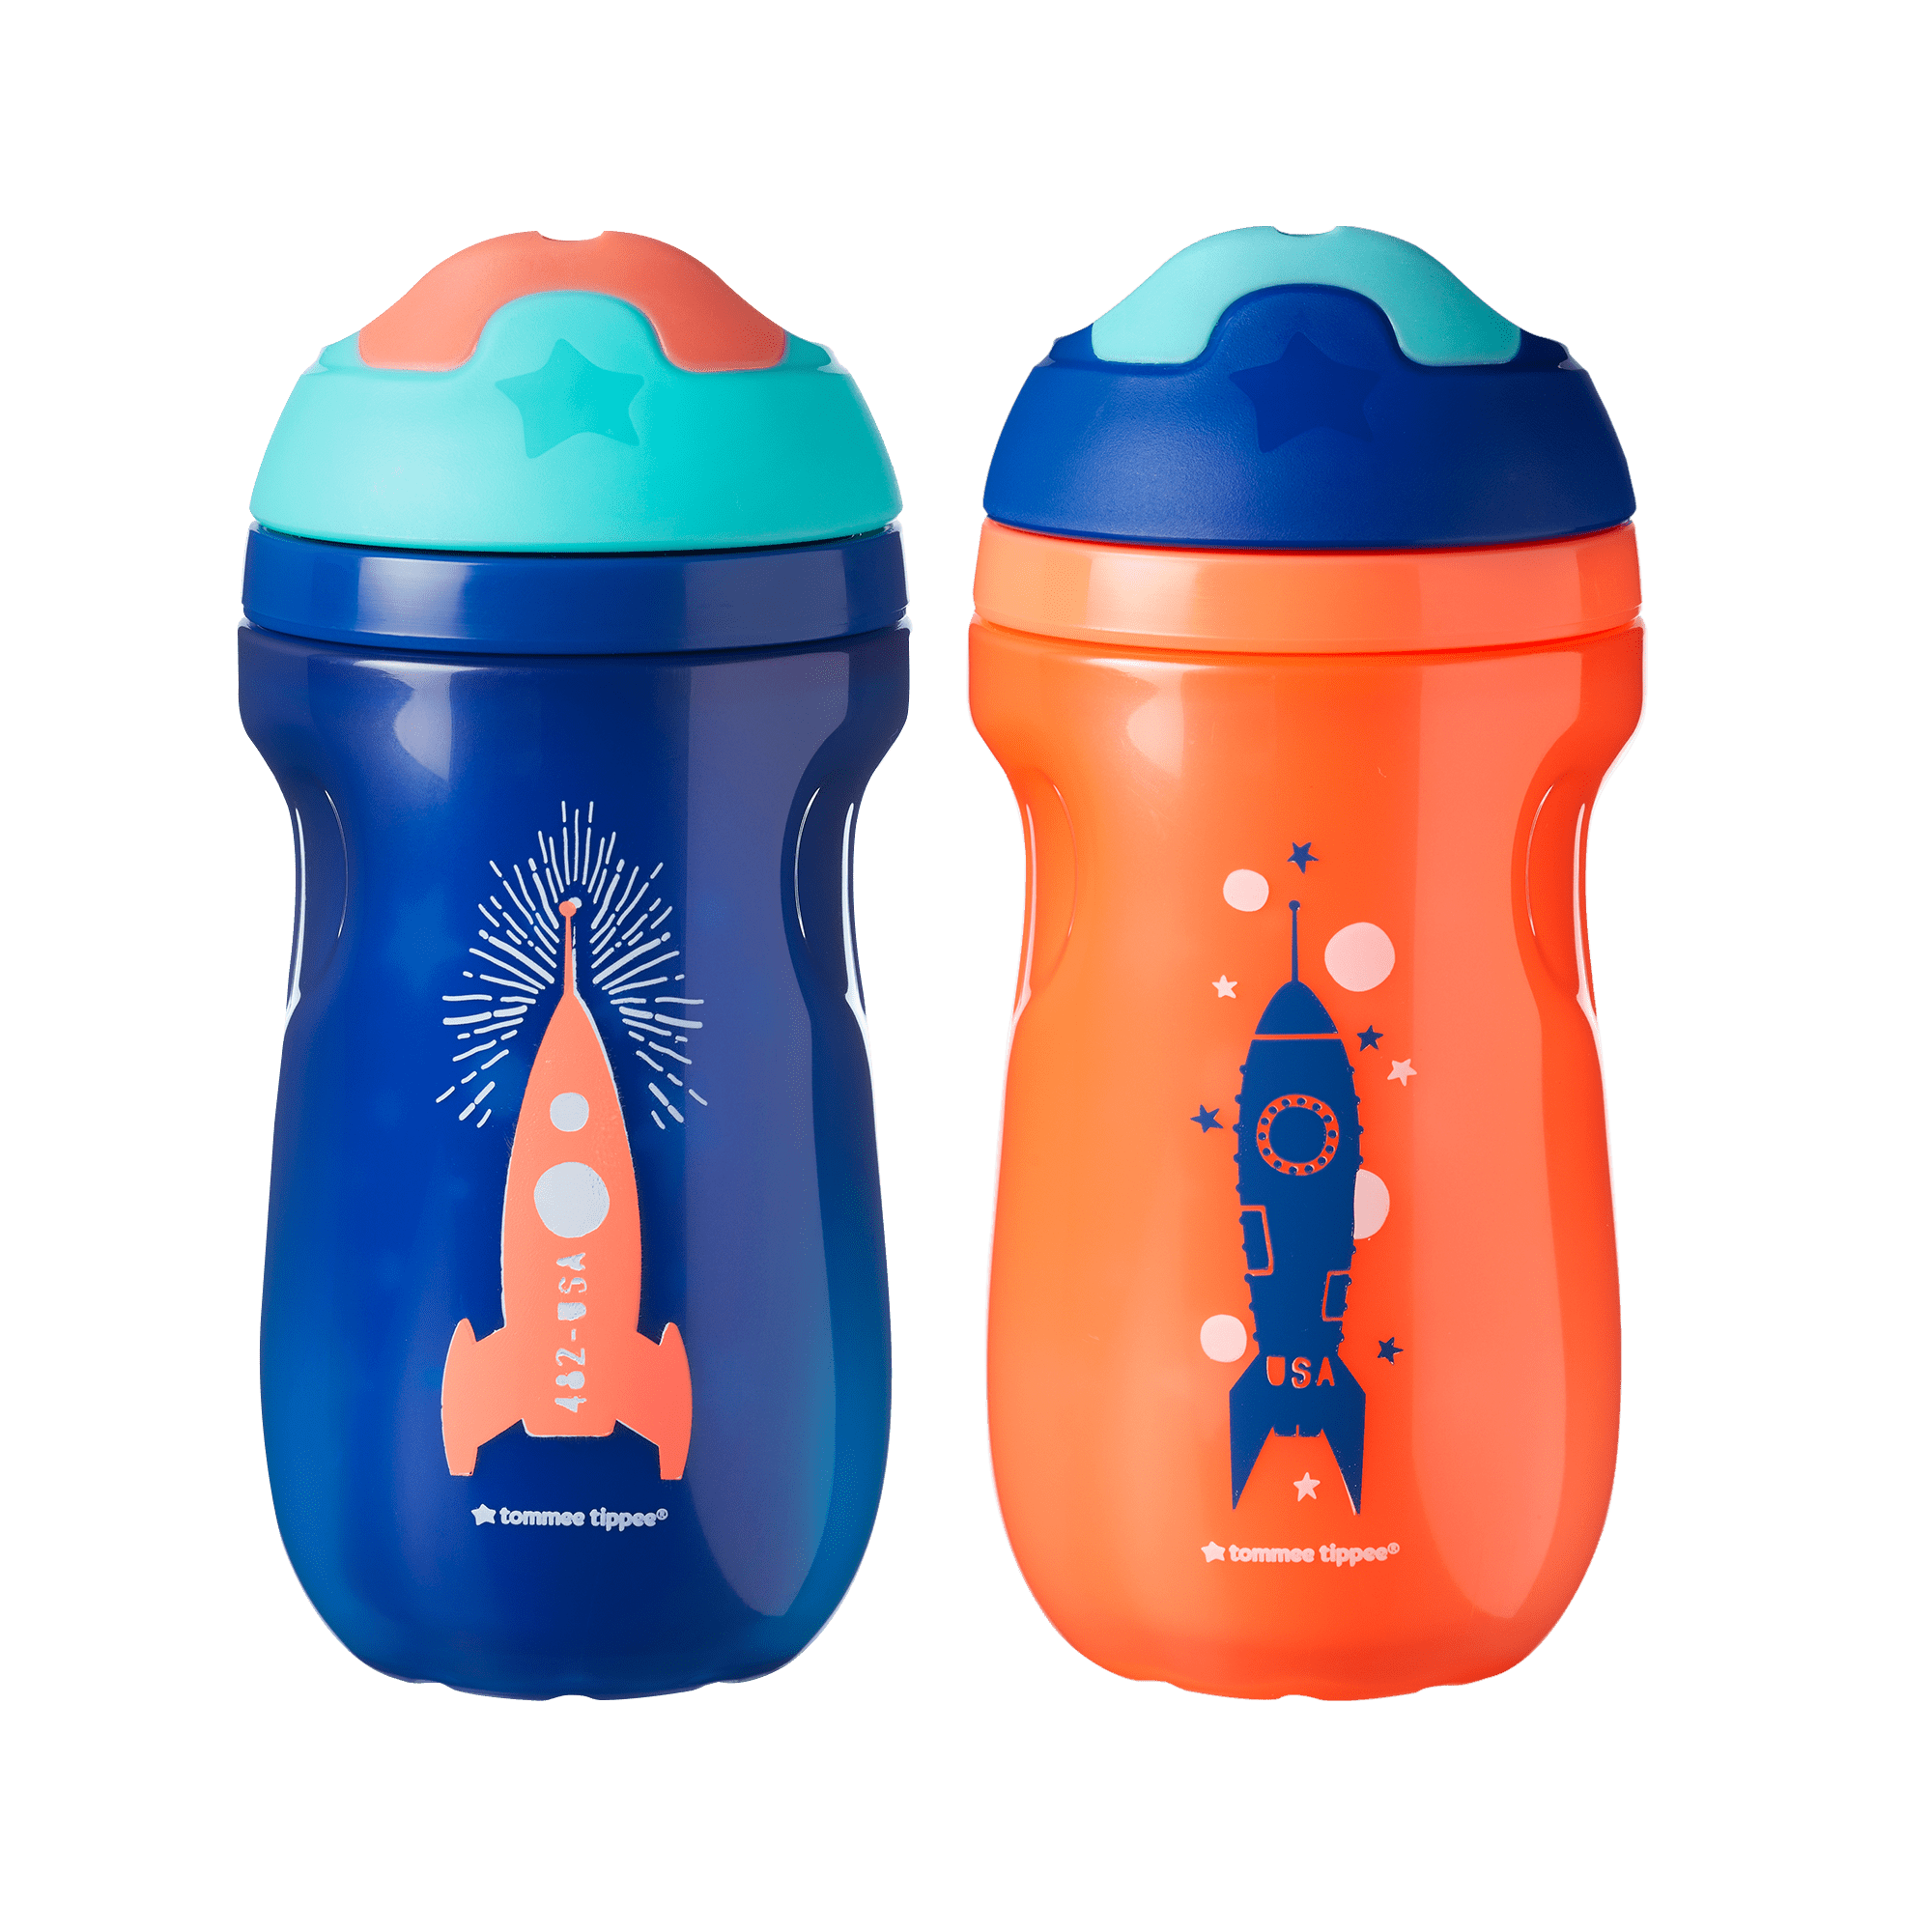 Comforts™ For Toddler Designer Series Insulated Straw Sippy Cup, 1